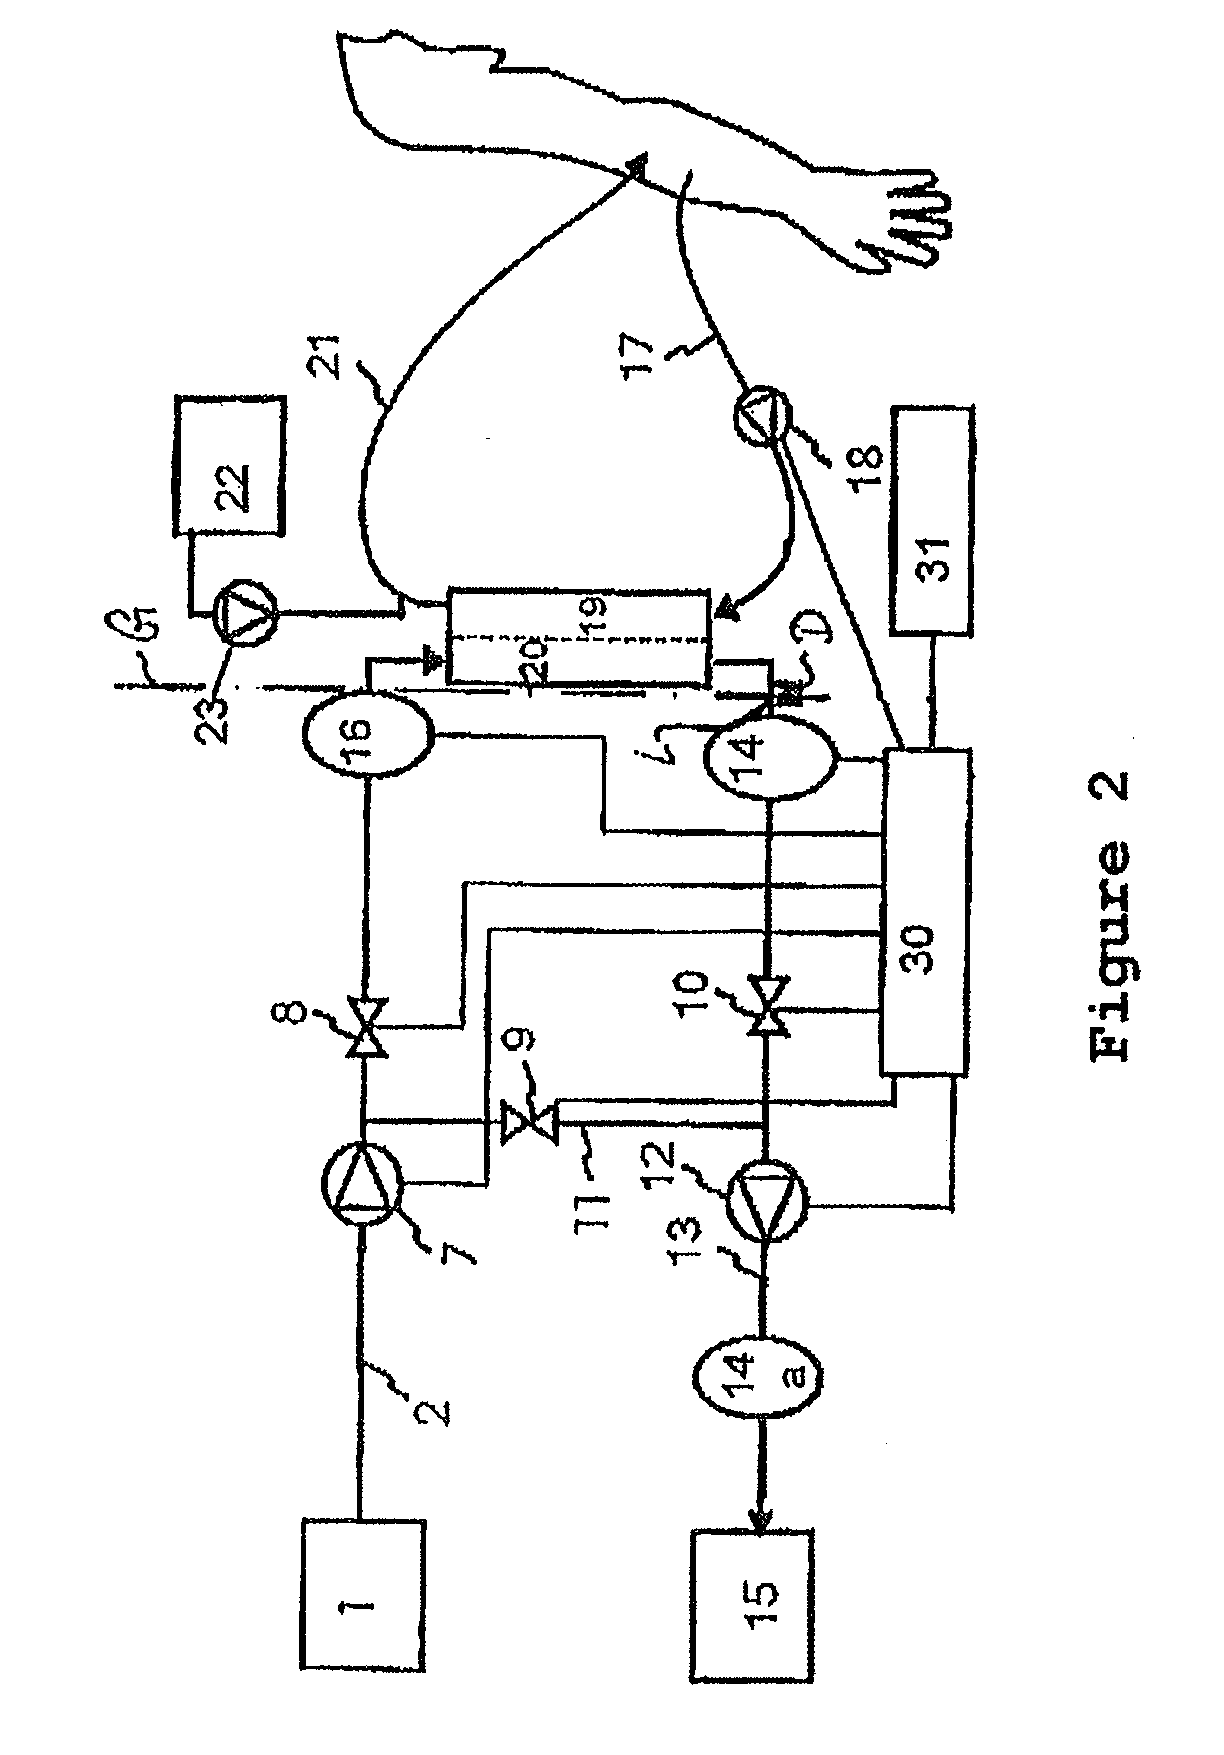 Device for extracorporeal blood treatment